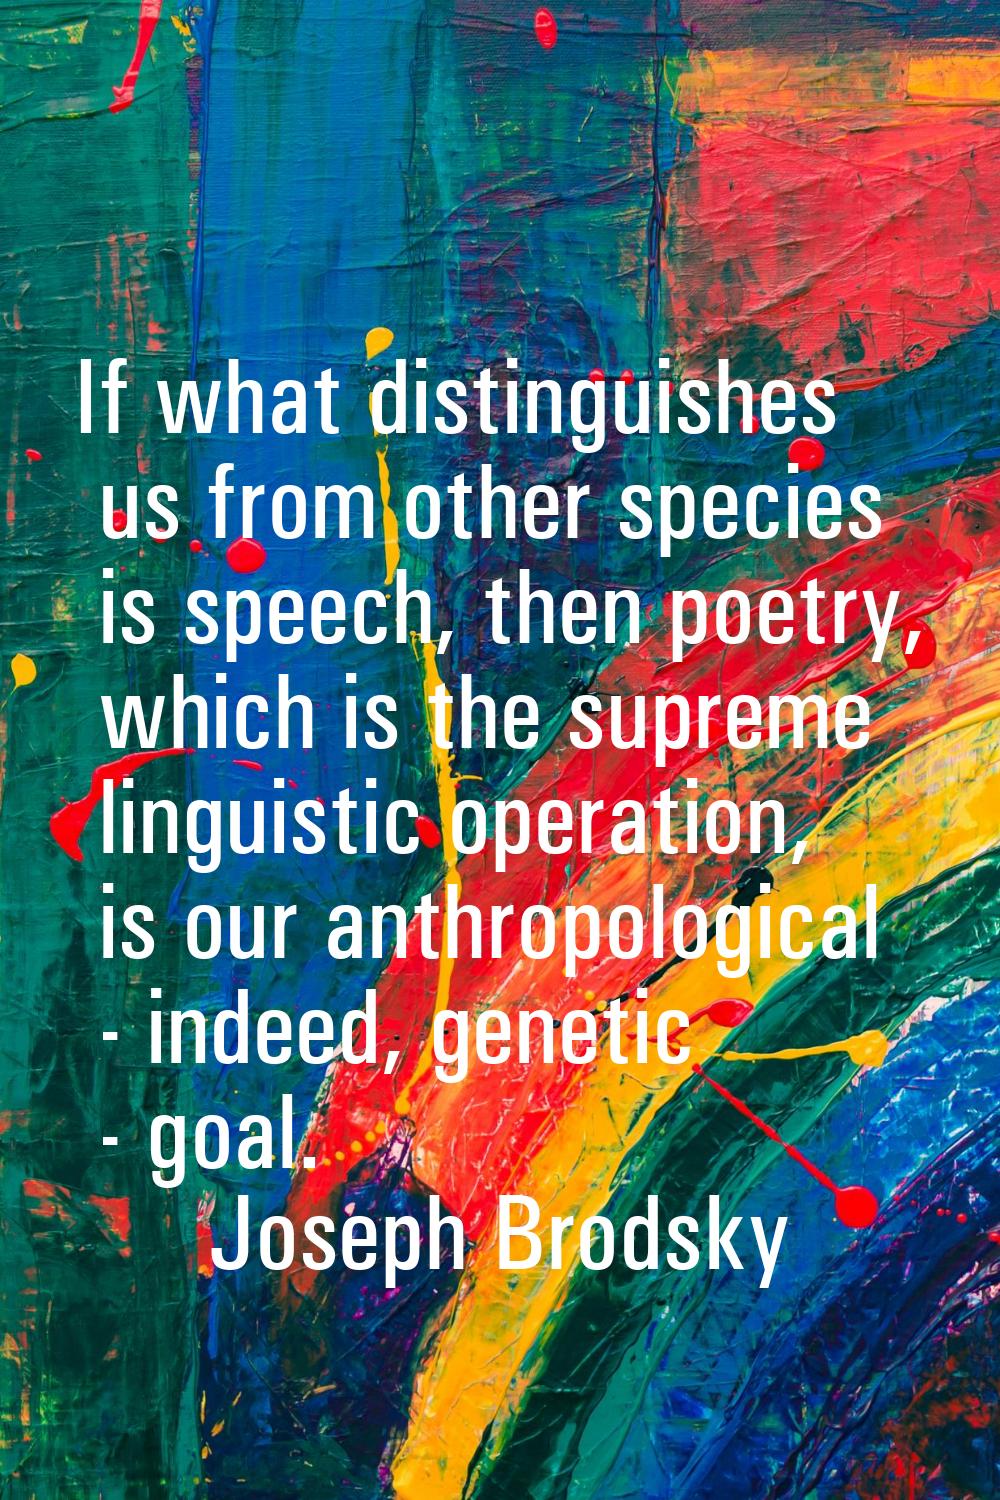 If what distinguishes us from other species is speech, then poetry, which is the supreme linguistic